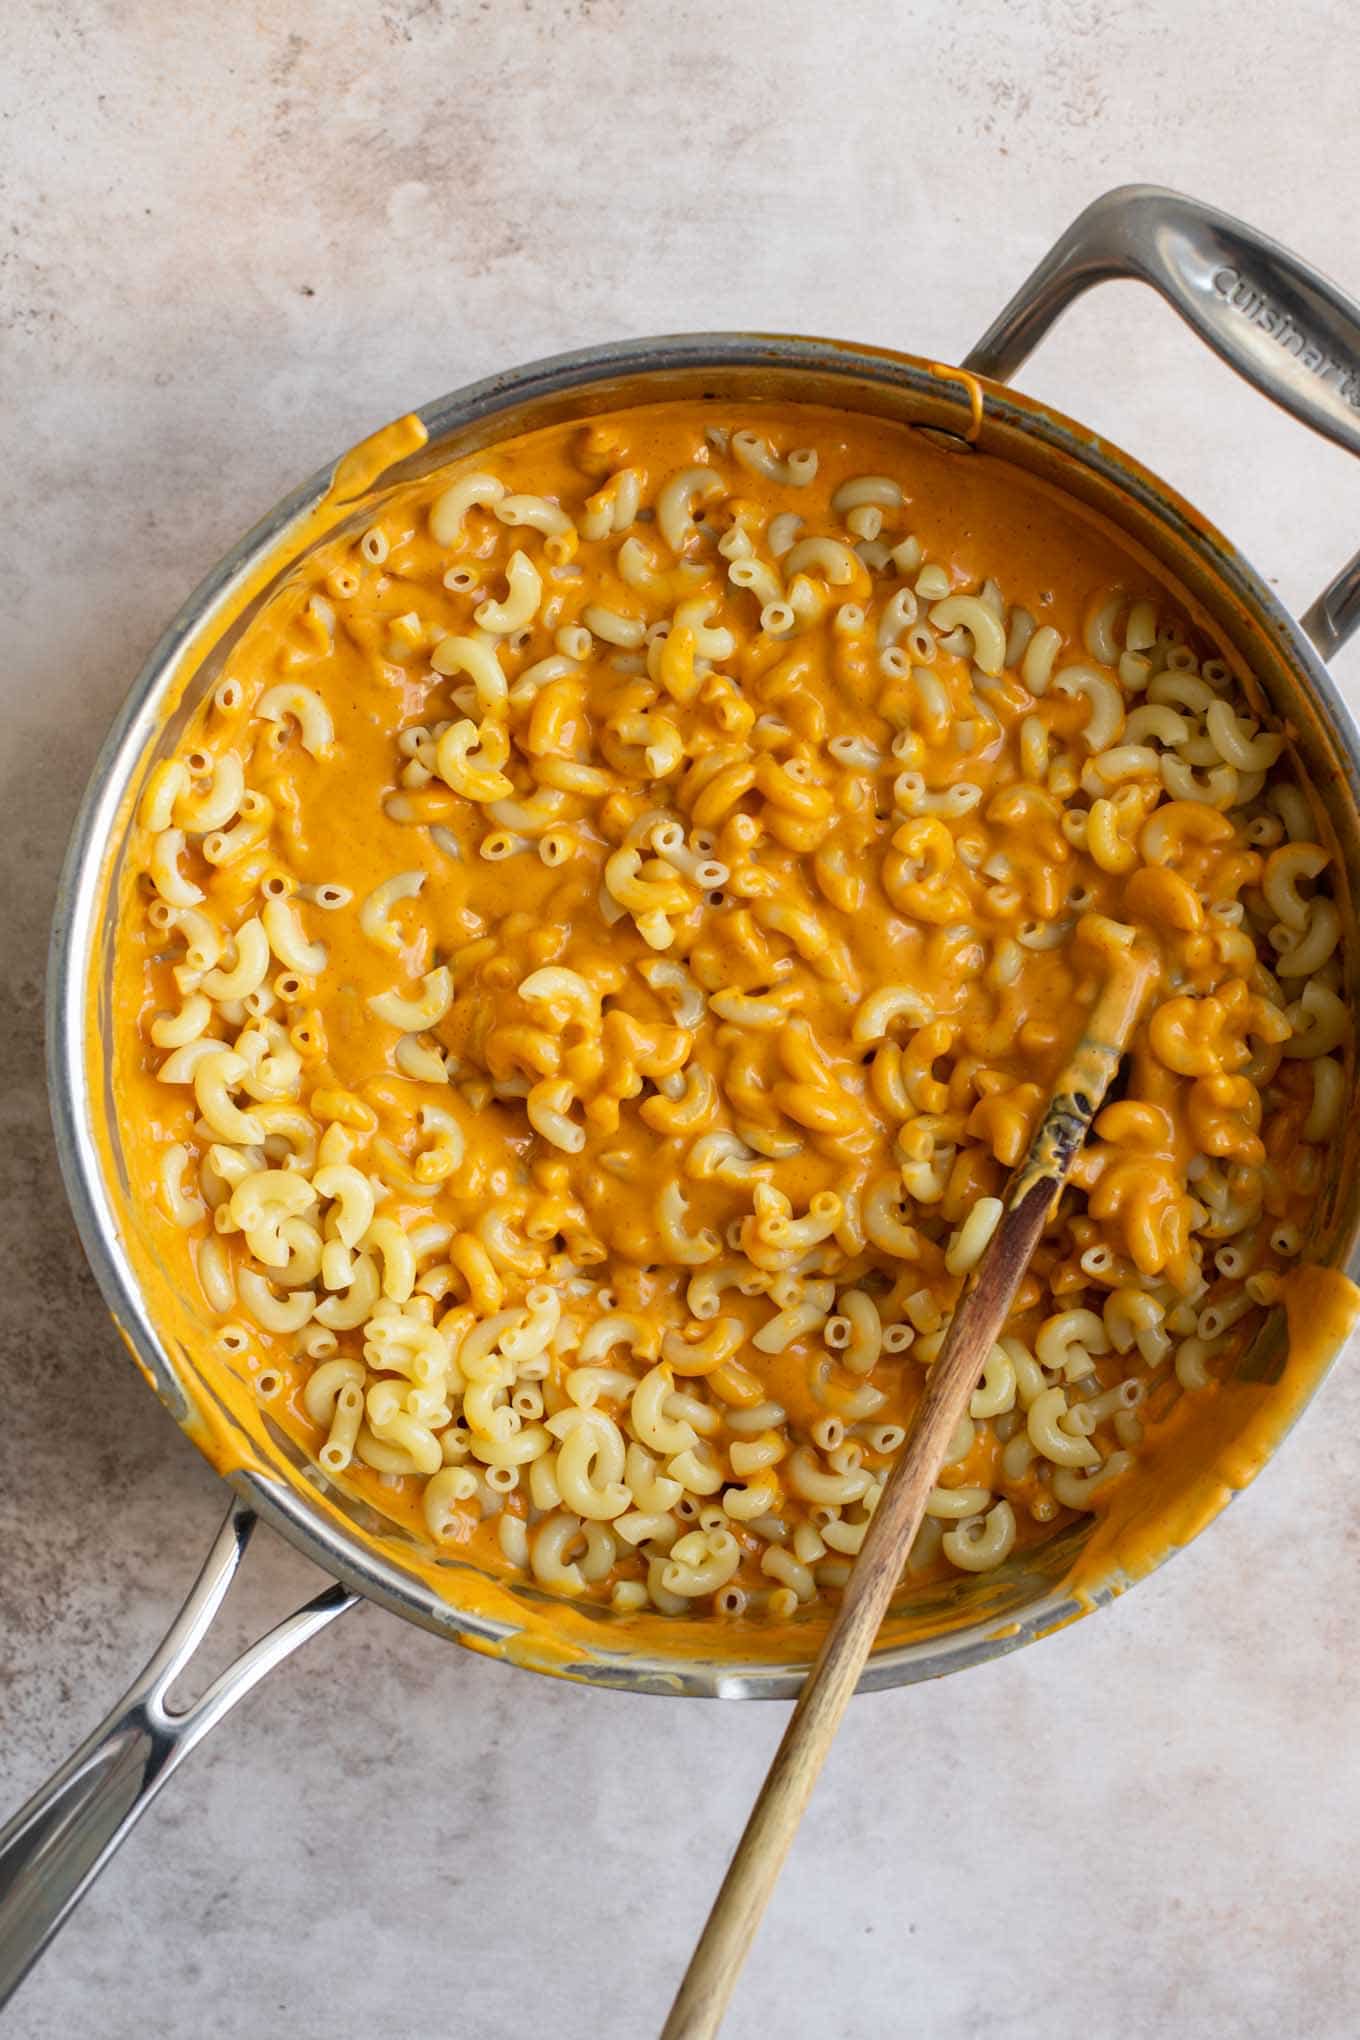 elbow macaroni noodes halfway mixed into the berbere cheese sauce